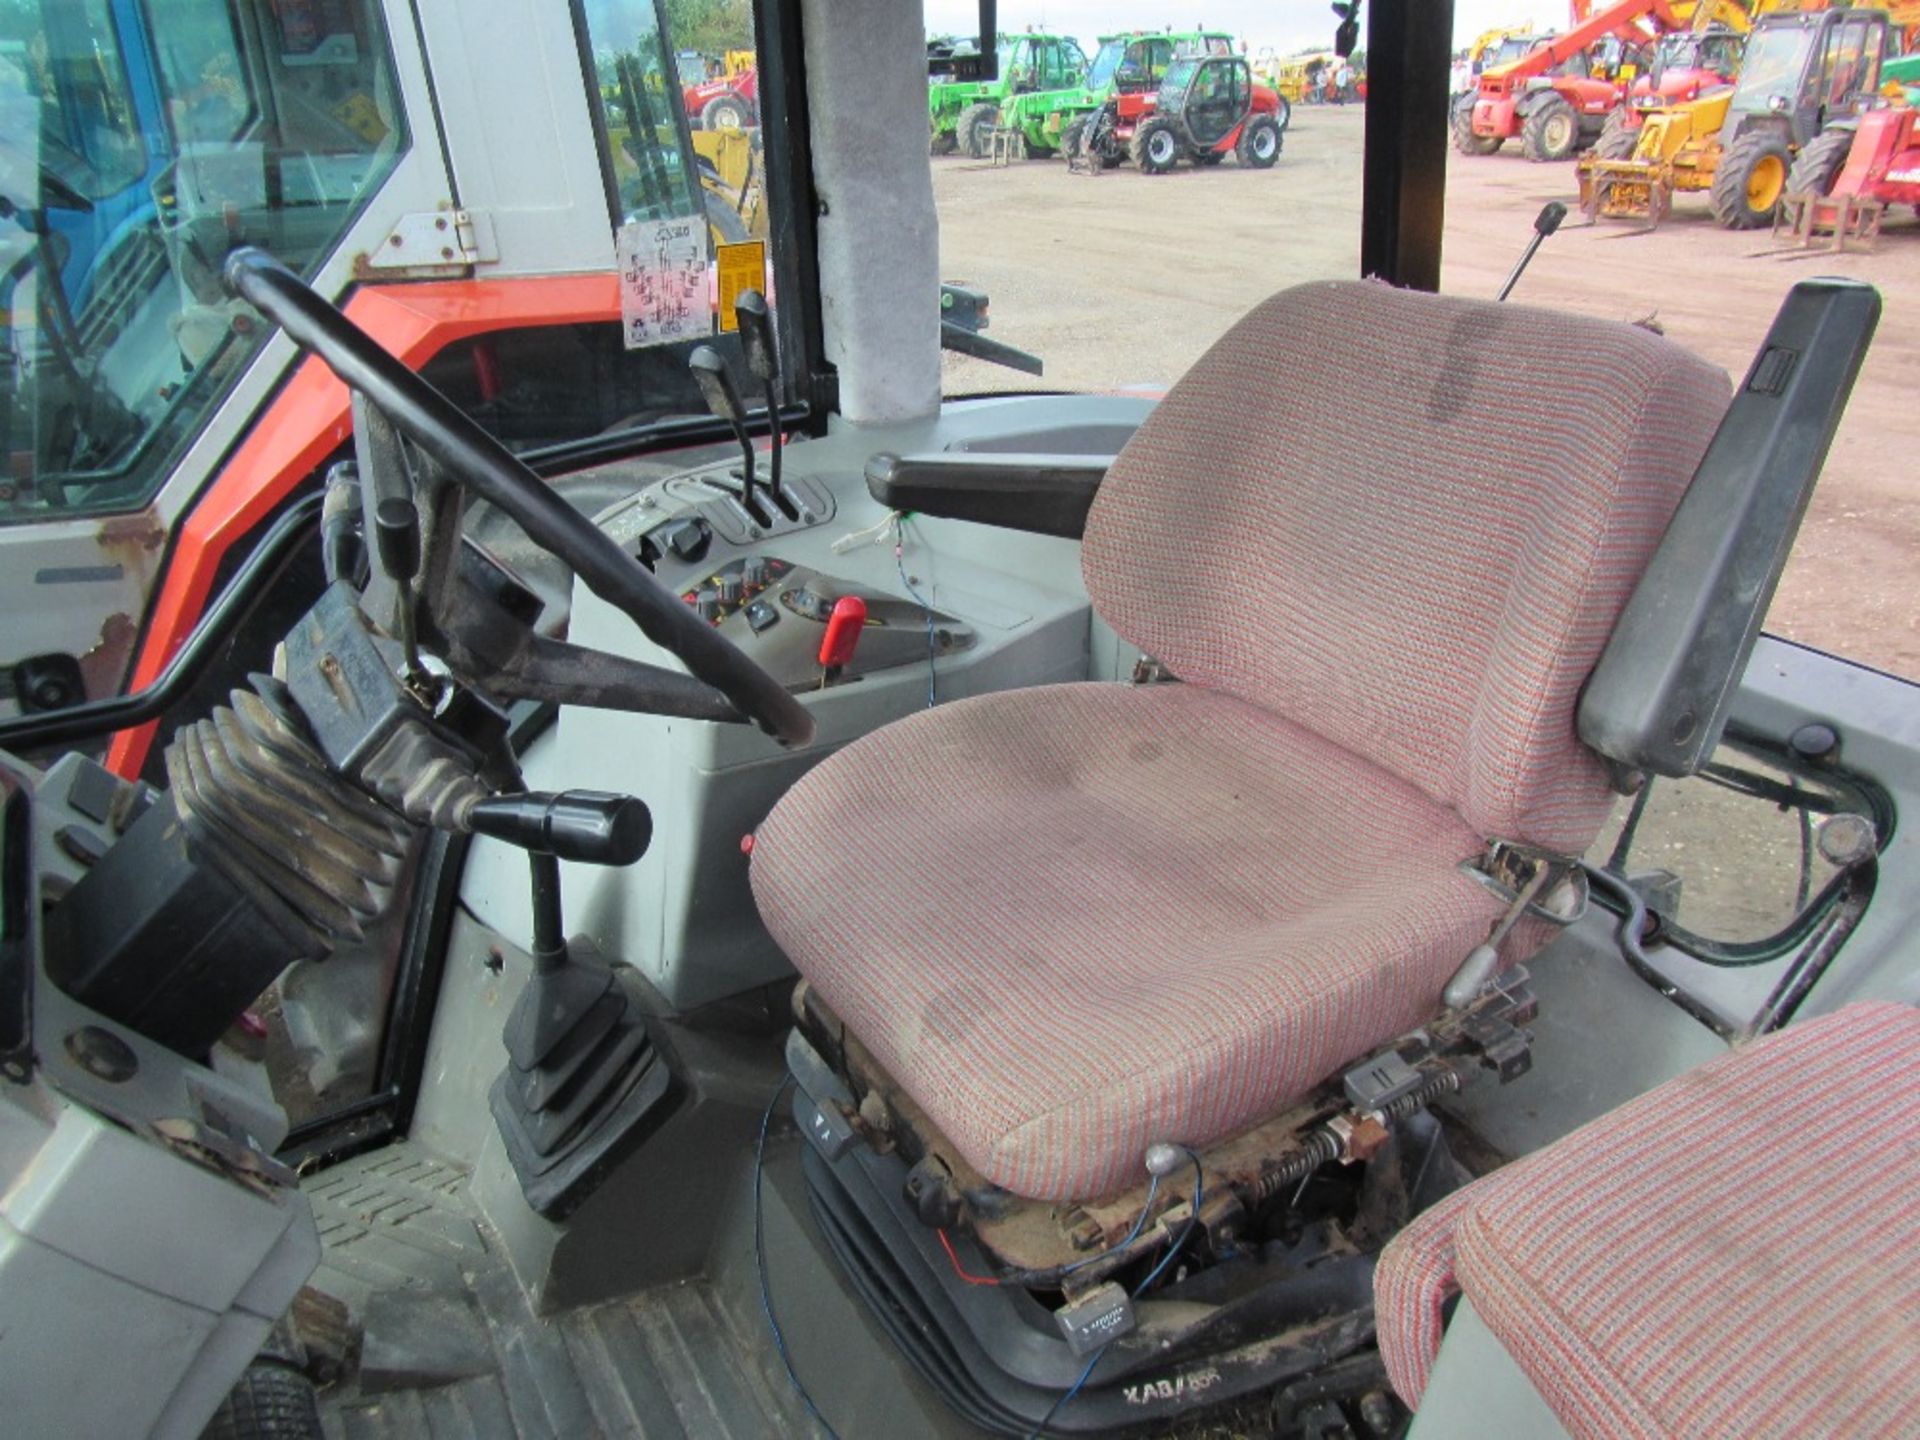 Massey Ferguson 6170 Dynashift 4wd 40k Tractor with Air Con. 5735 hrs. Reg. No. N264 JHG - Image 10 of 14